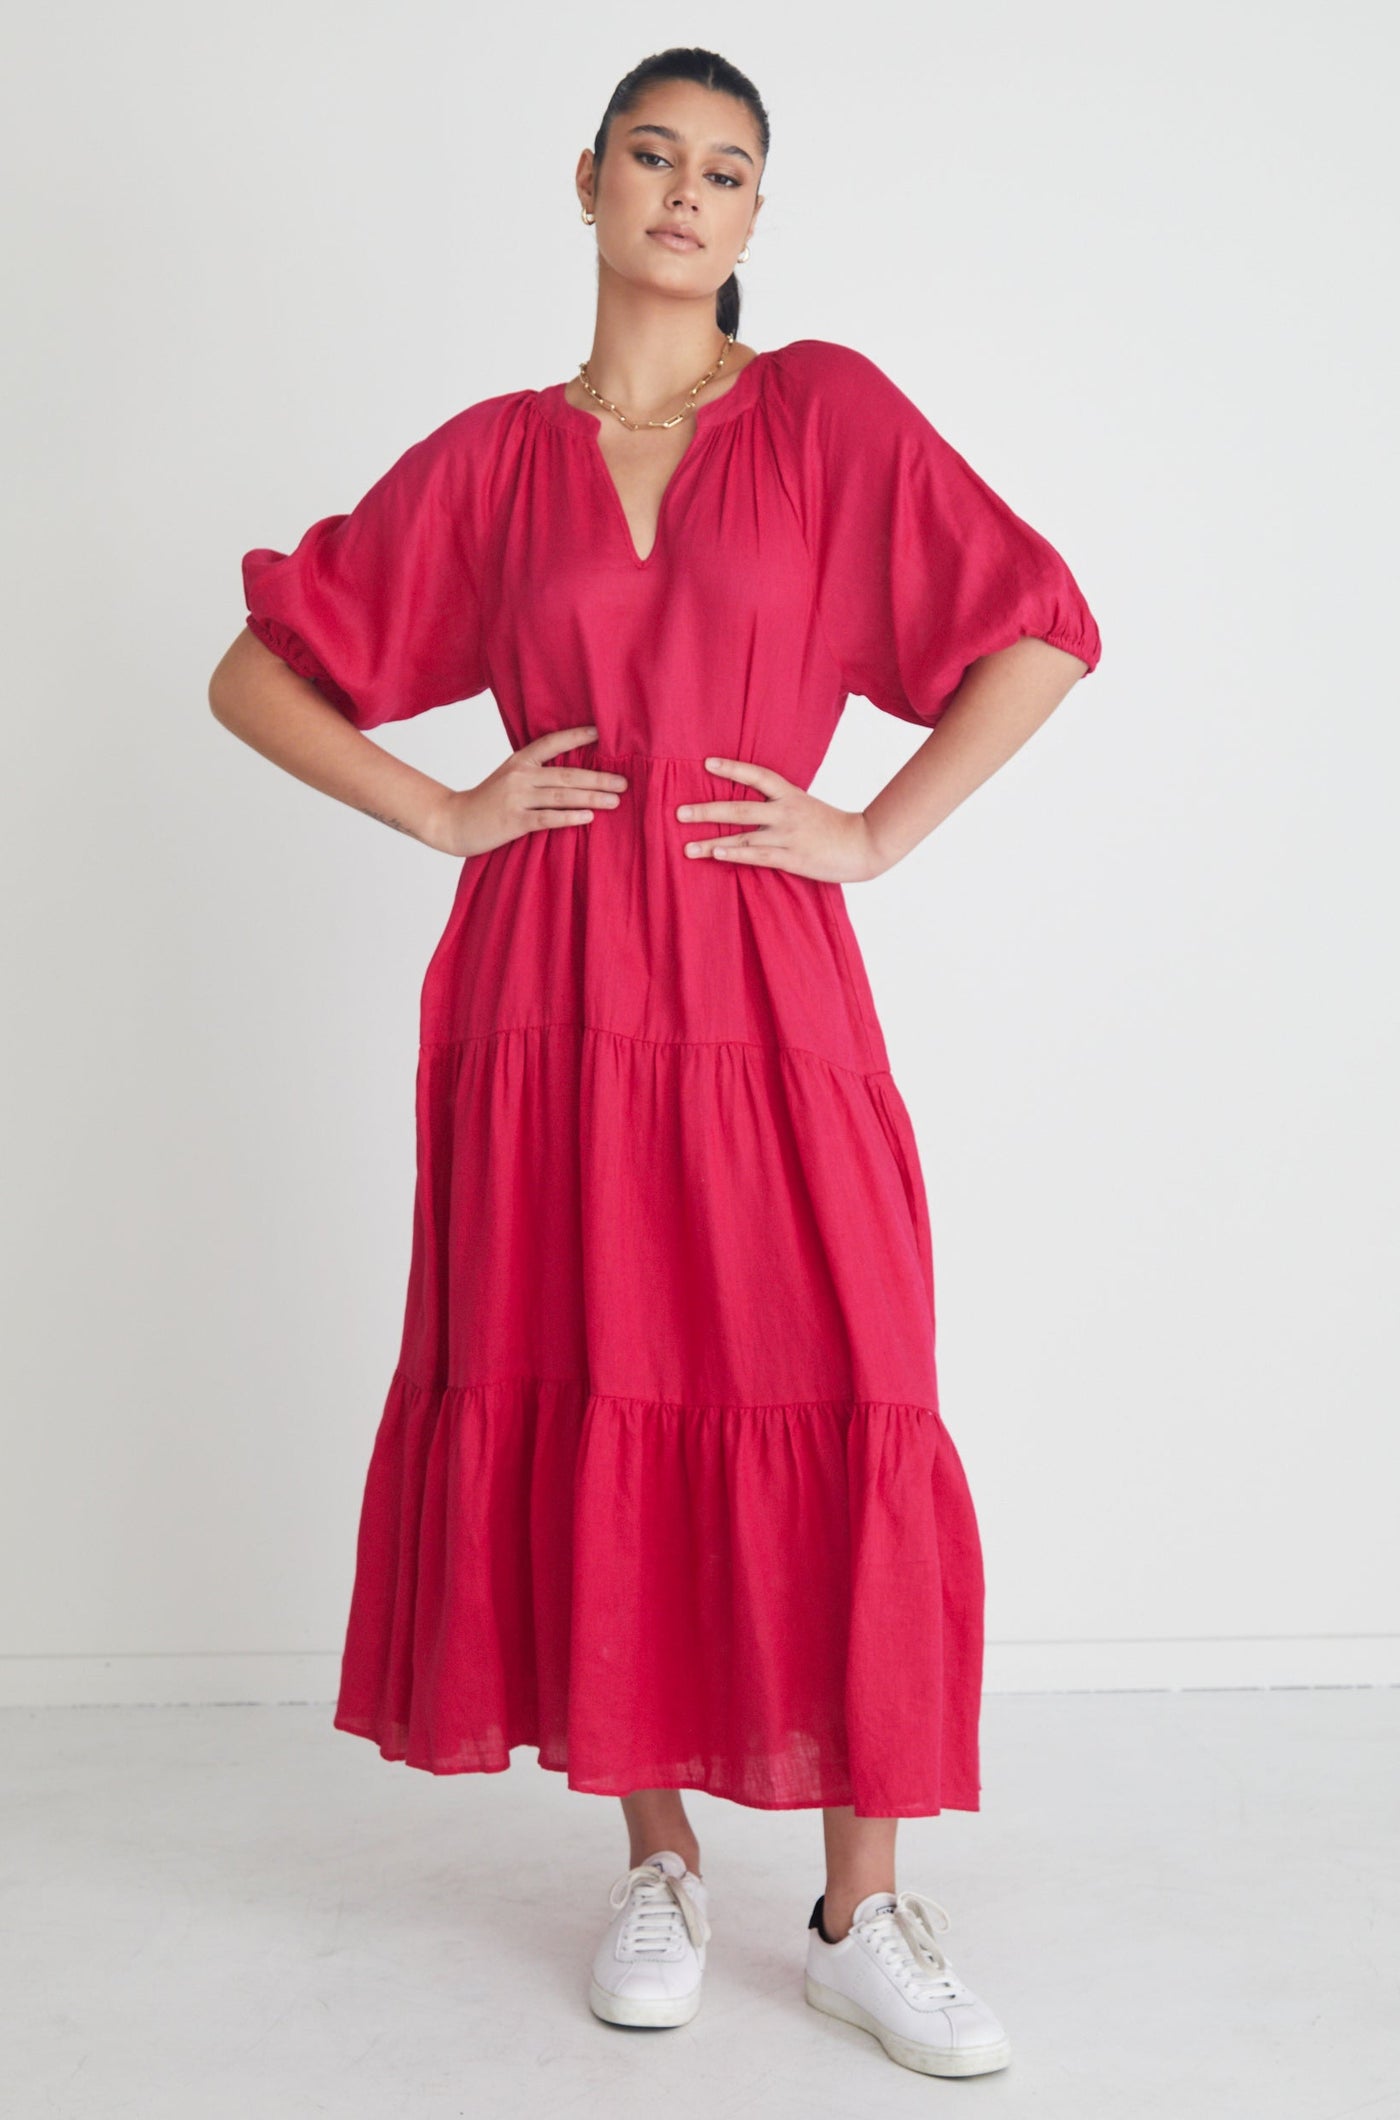 The Santorini Maxi Dress available in a beautiful bright Rasberry! Stay stylish yet comfortable all day in this eyecatching maxi! Maxi length Puff sleeve V neckline Tiered skirt 100% Linen